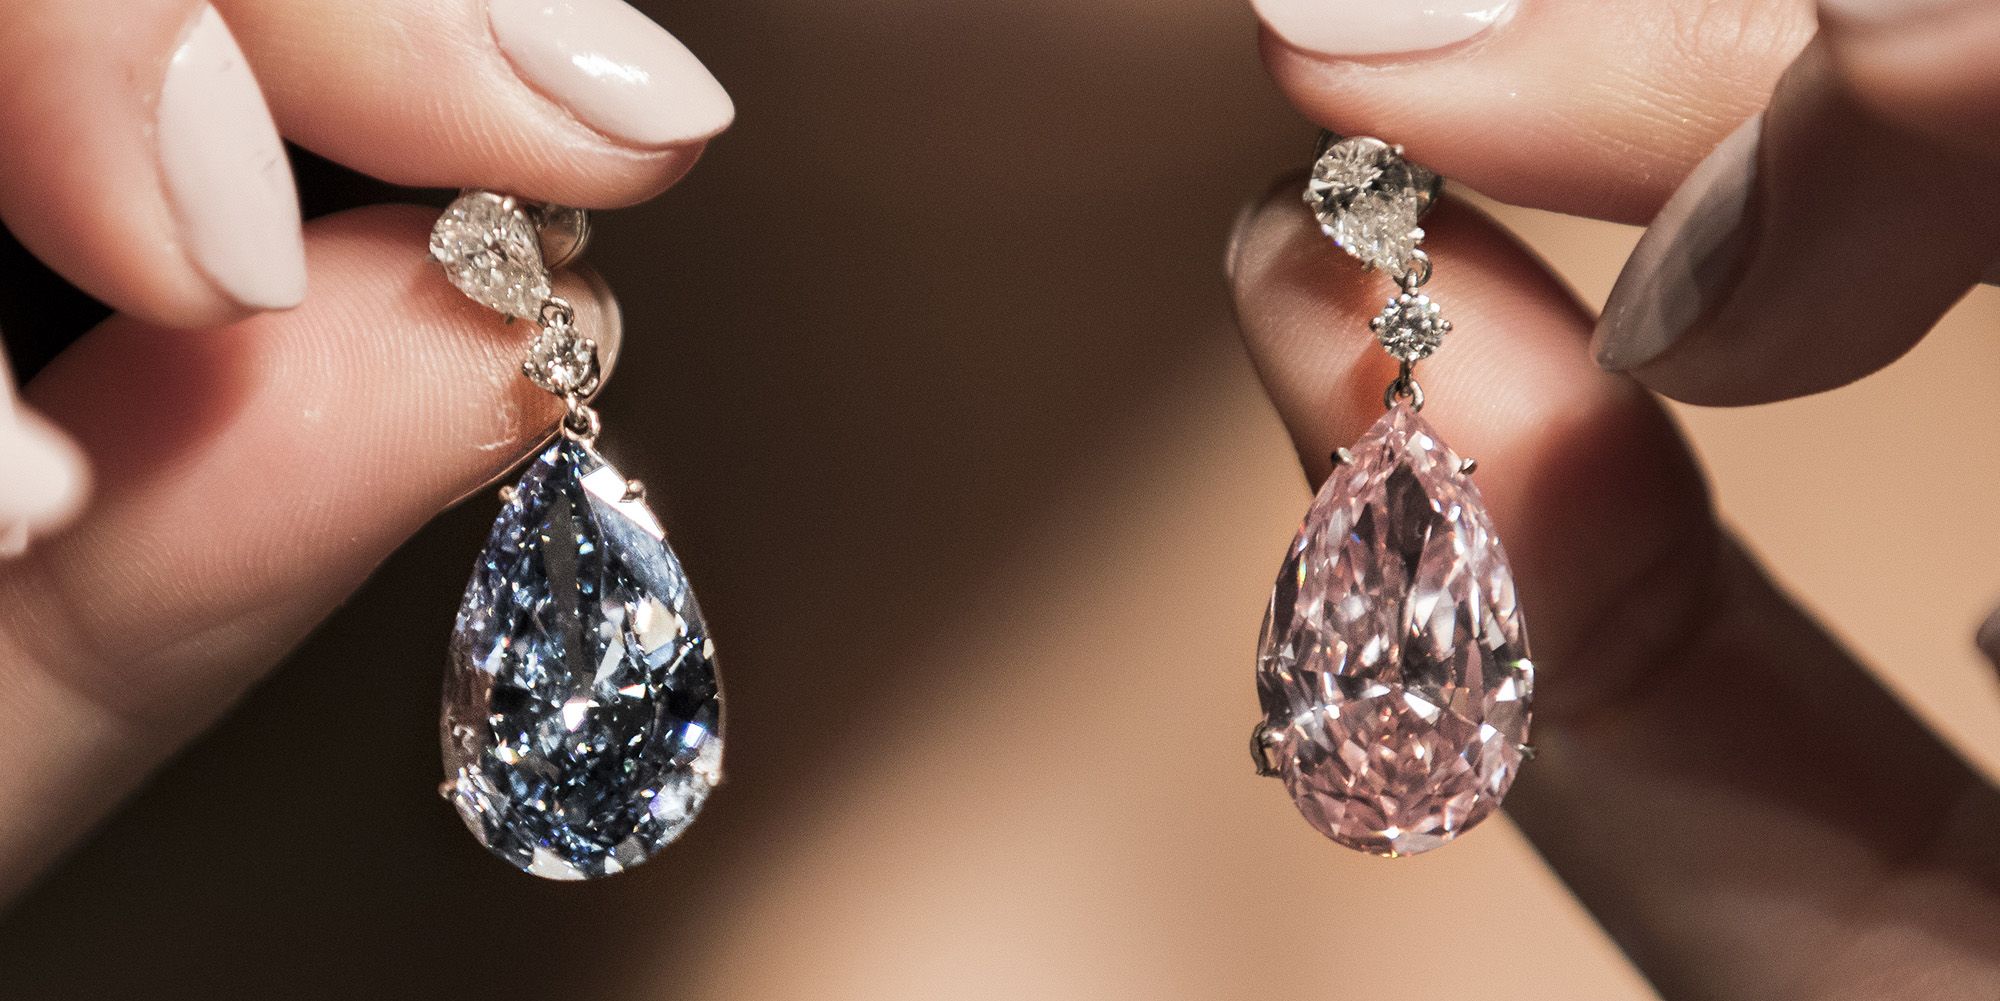 The World’s Most Expensive Earrings Sold At Auction